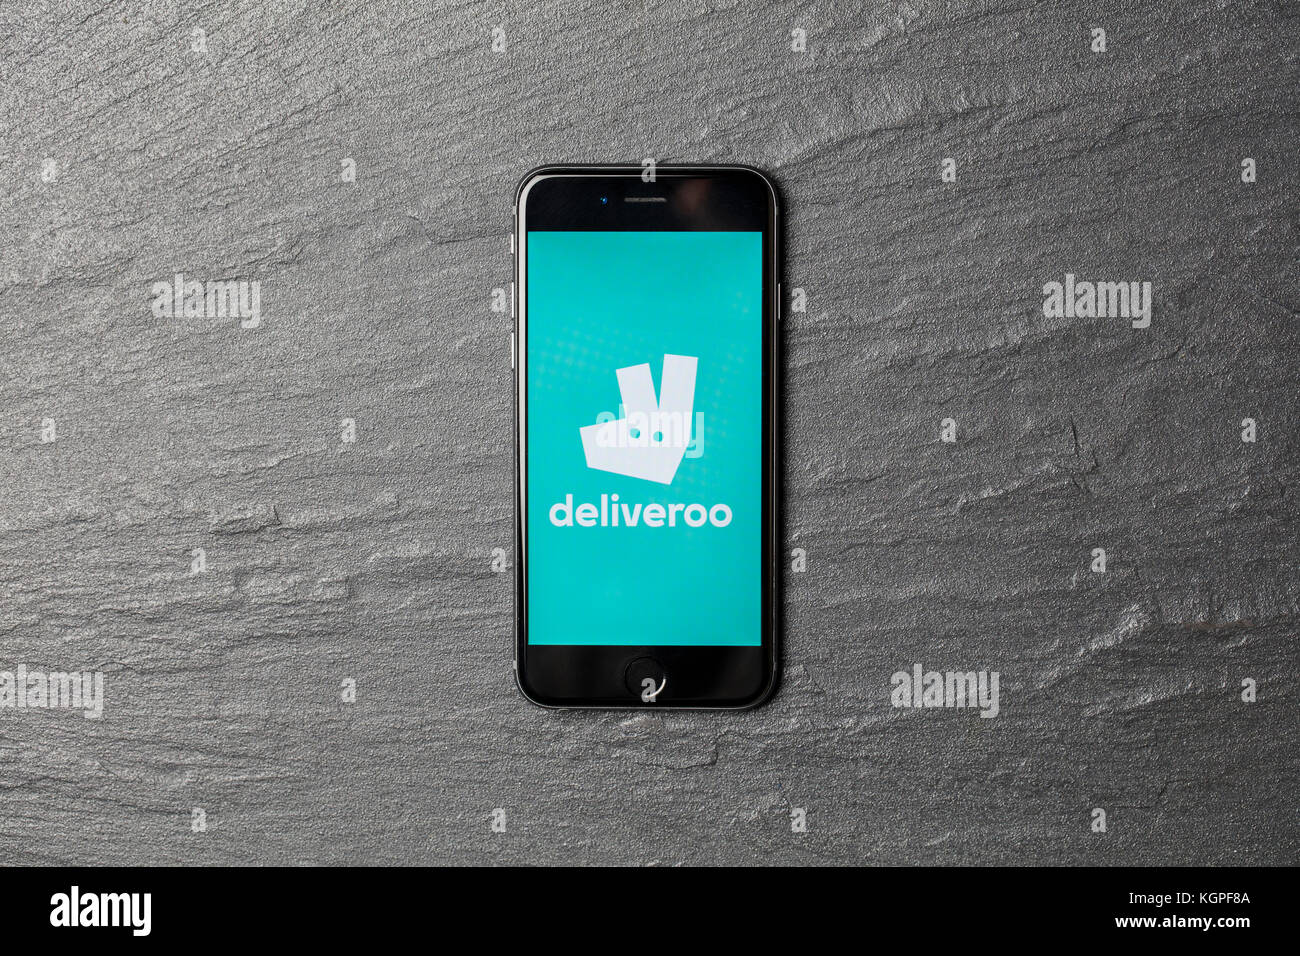 LONDON, UK - NOVEMBER 9th 2017: An apple iPhone showing the Deliveroo application logo. Deliveroo is an online takeaway delivery service Stock Photo